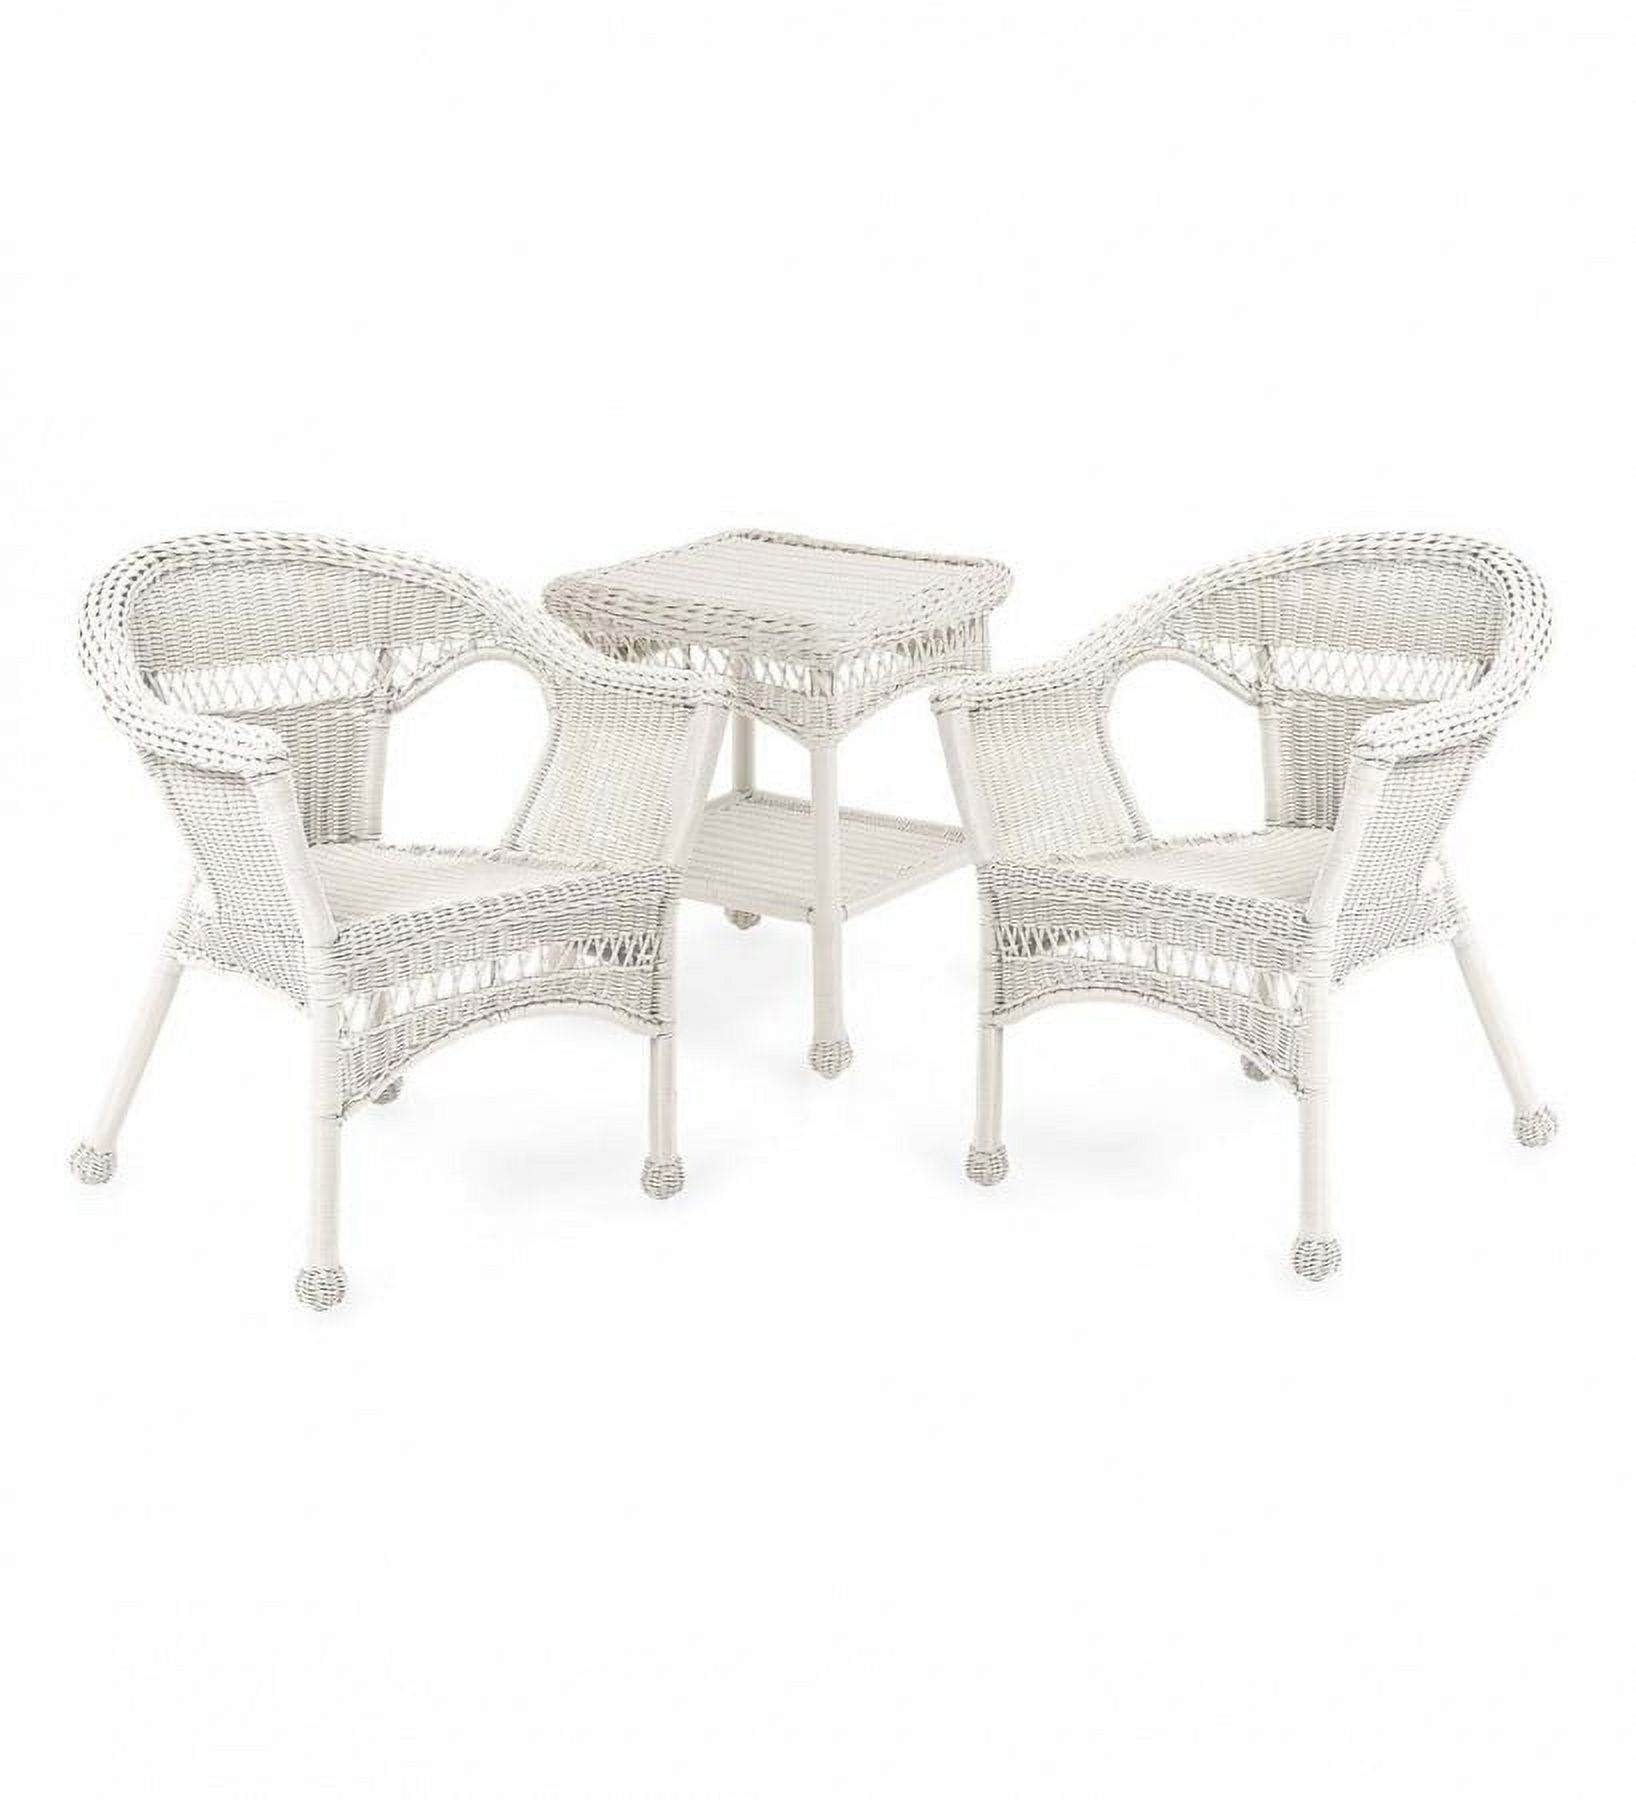 Plow & Hearth Easy Care Resin Wicker Furniture Set, Two Chairs and End Table - Off-White - image 1 of 2